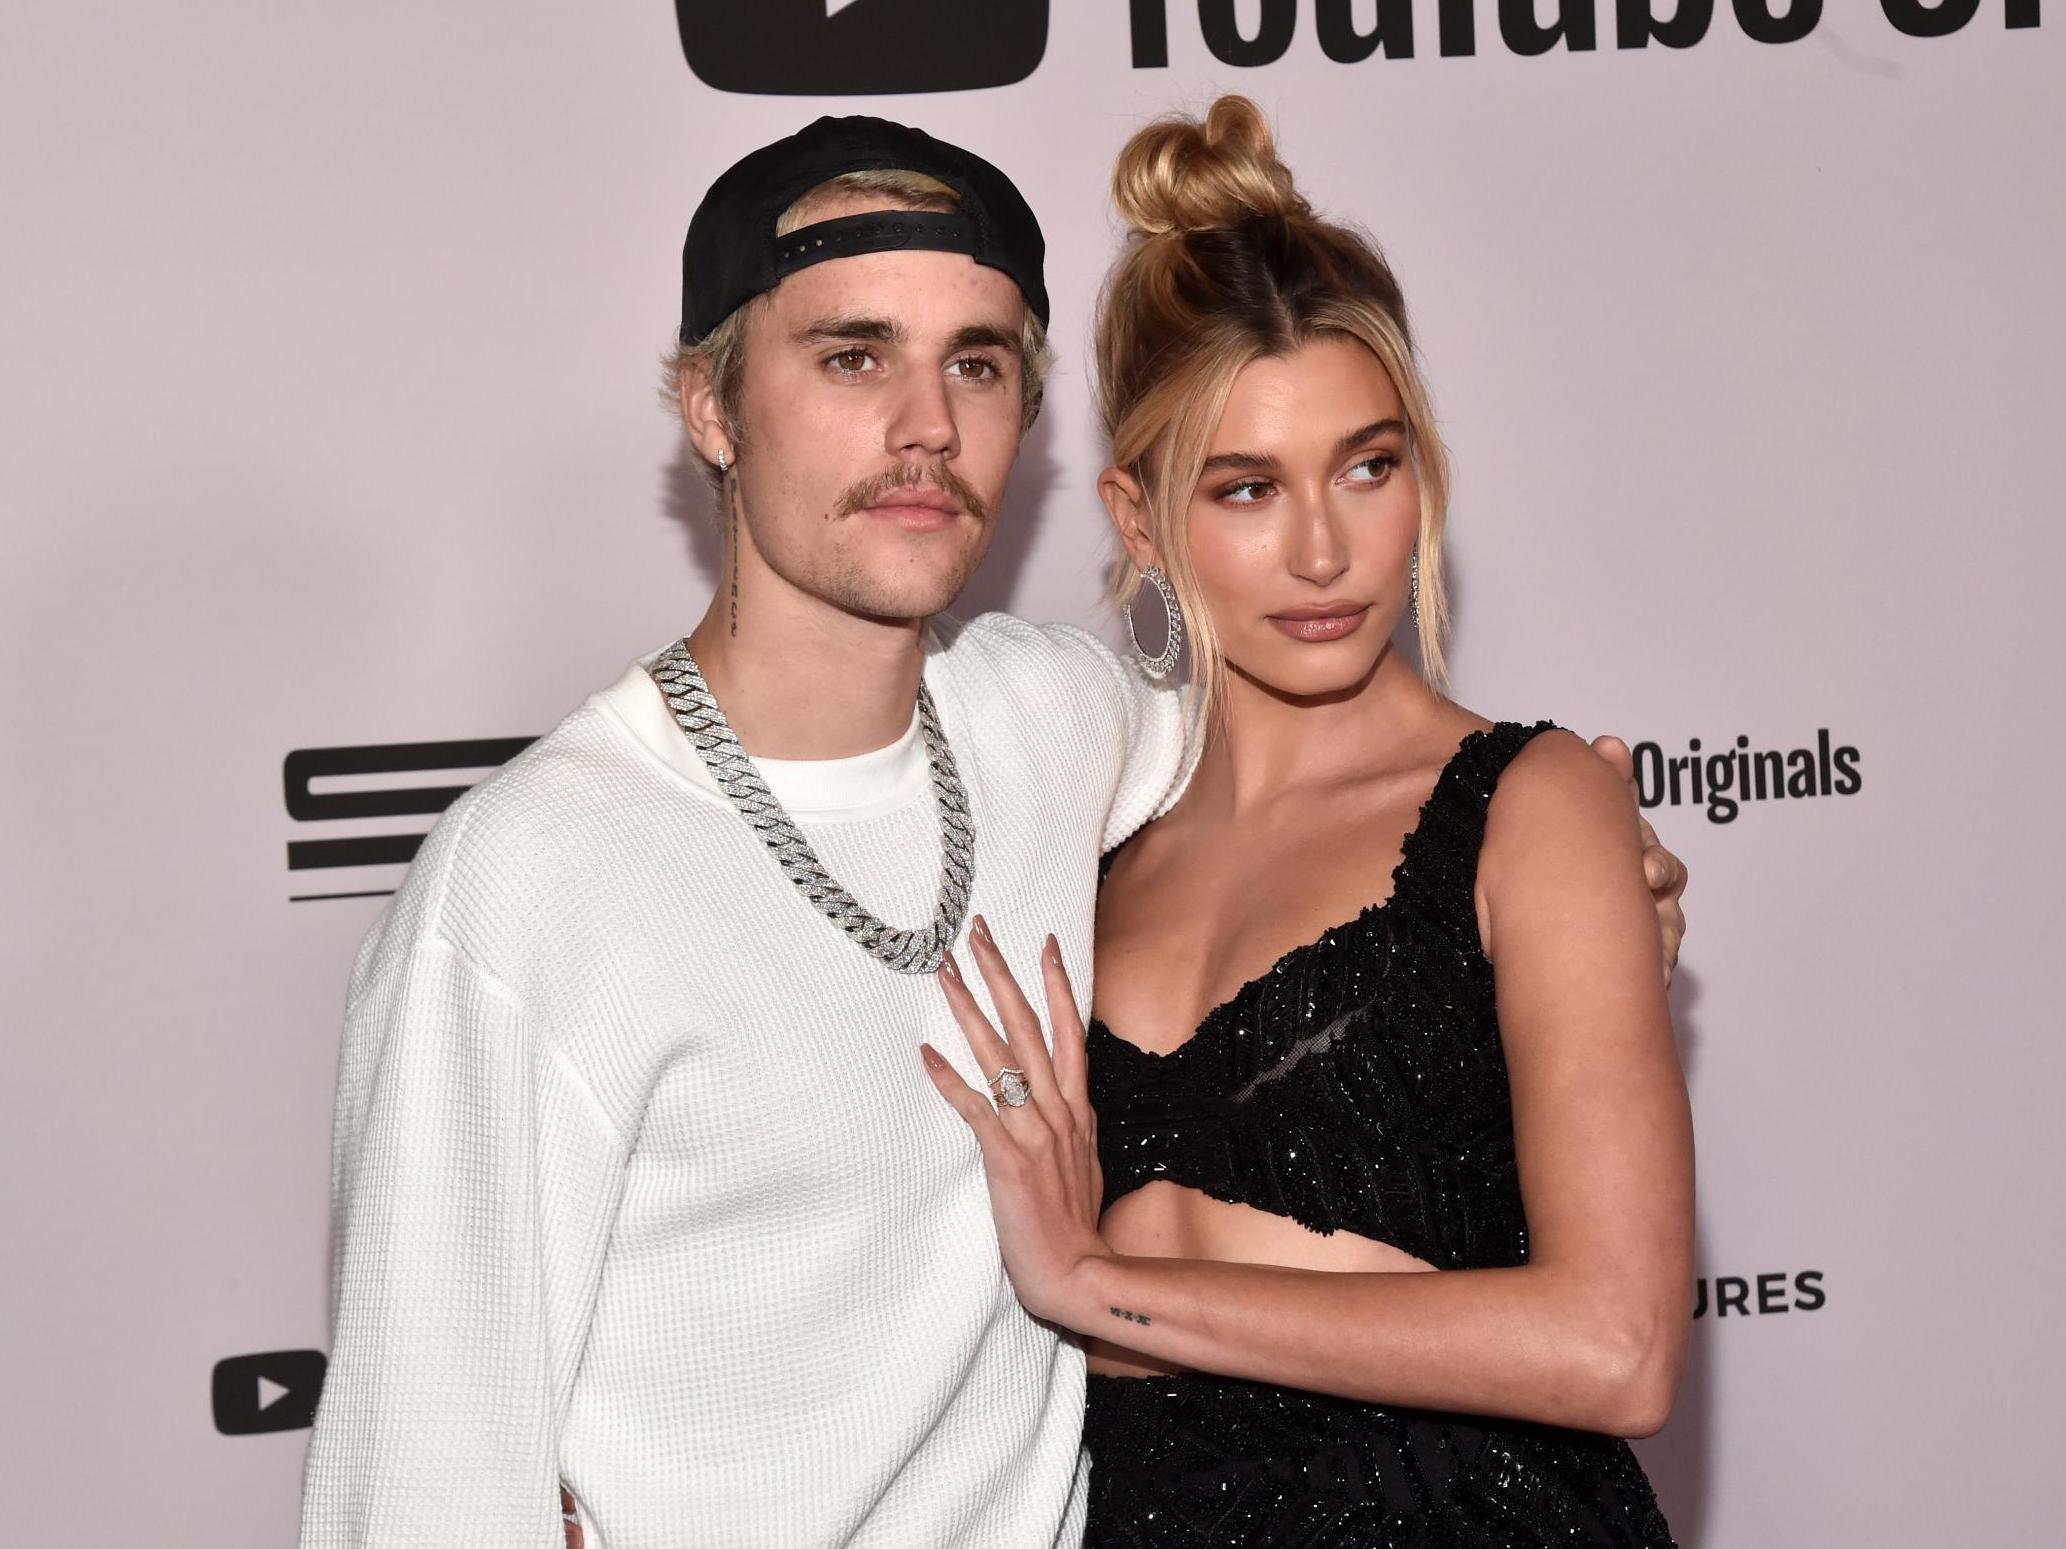 Justin Bieber teases that he is in 'arranged marriage' with wife Hailey